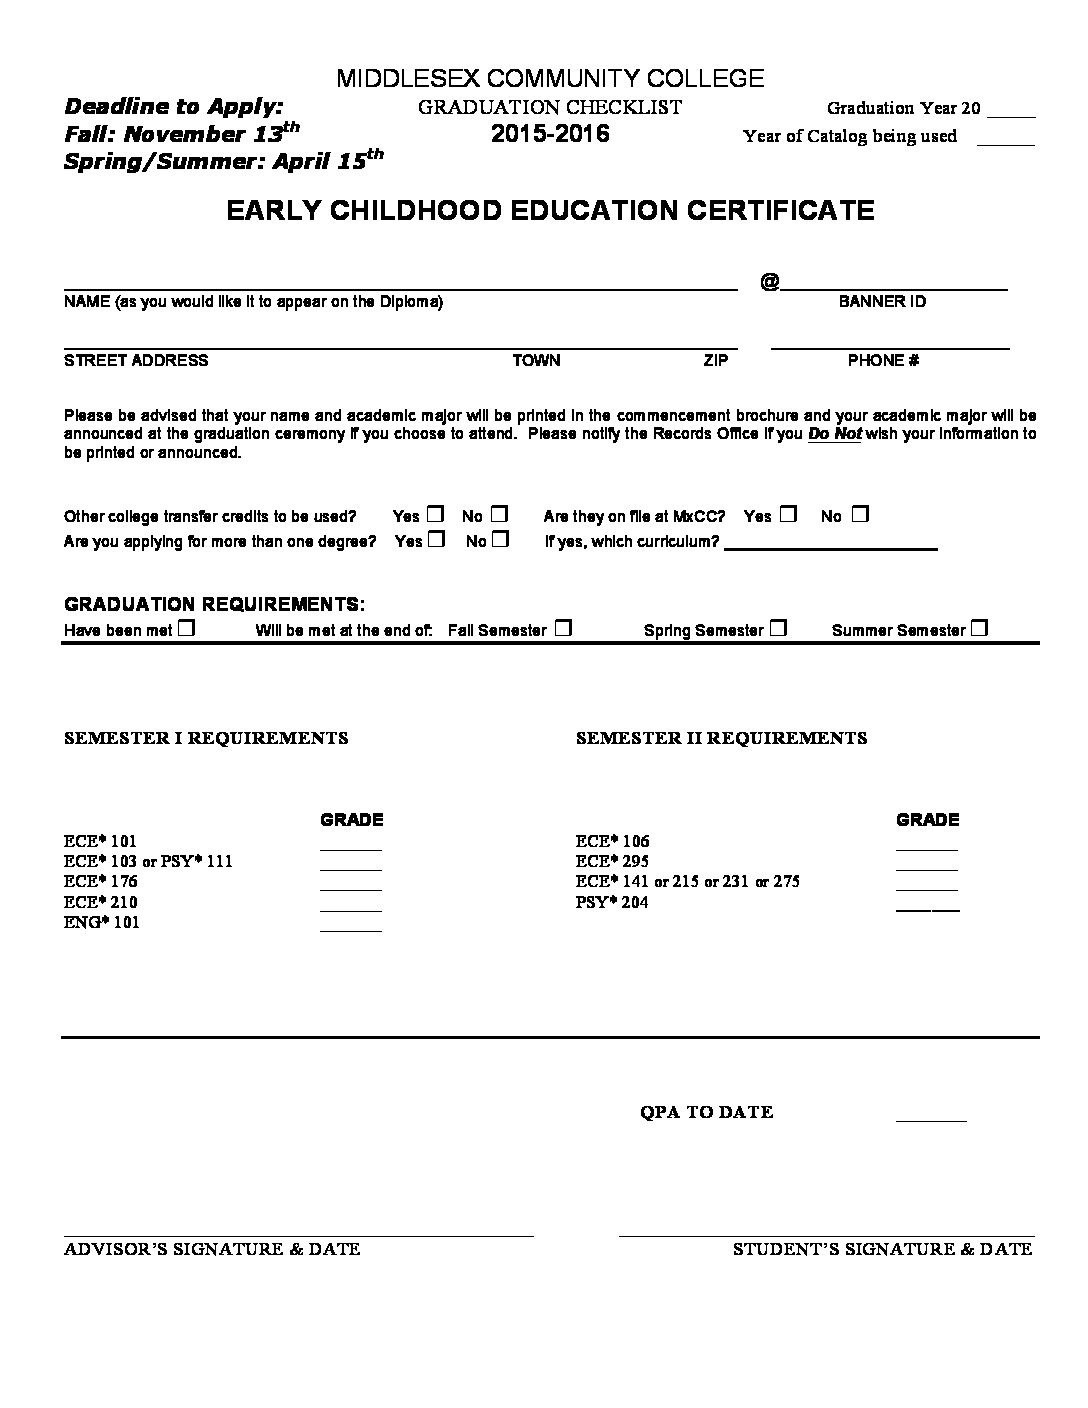 How to Get Early Childhood Education Certificate: Expert Guide